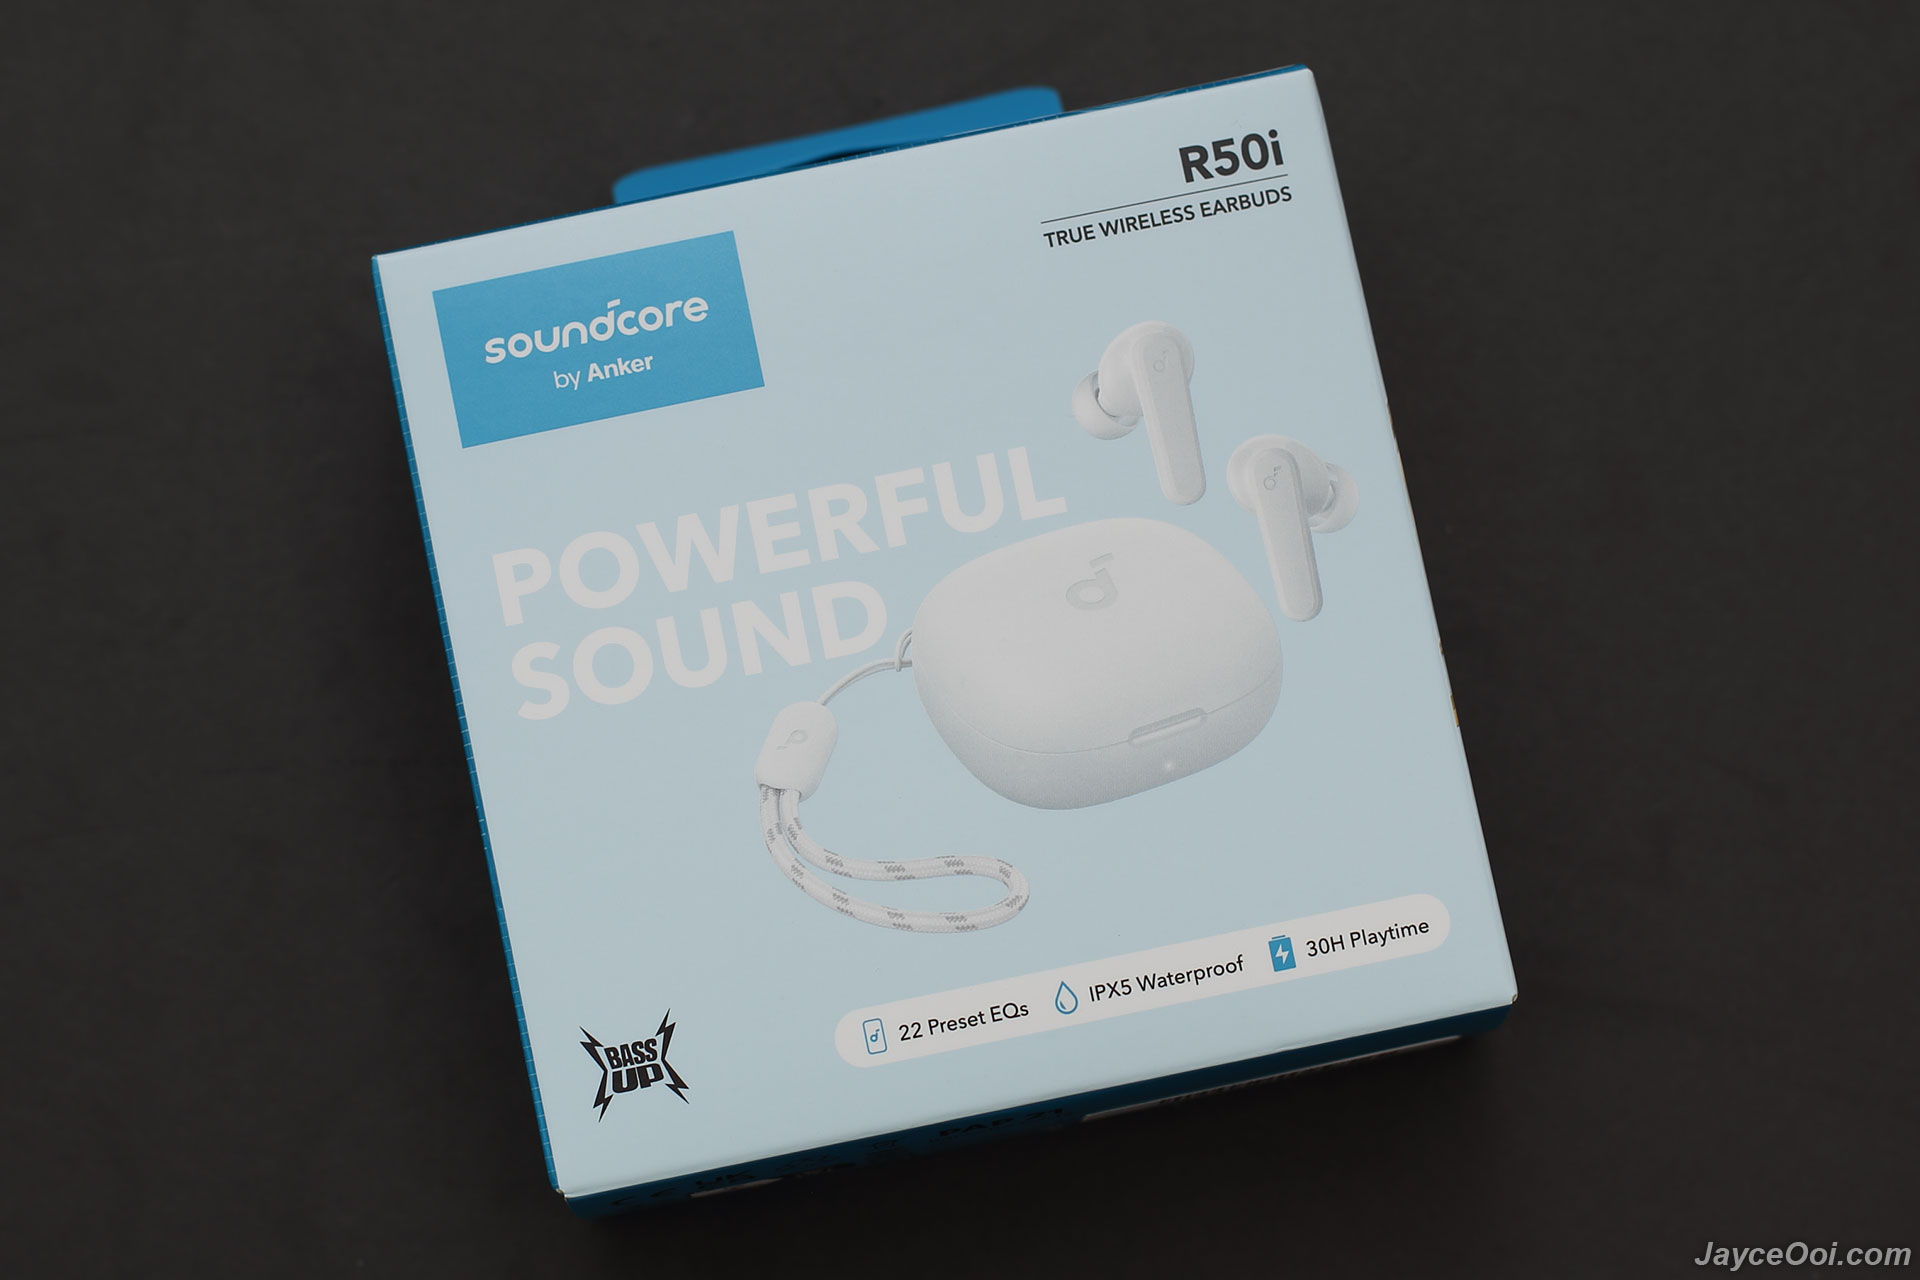 Soundcore by Anker P20i Review (Also Called the R50i)